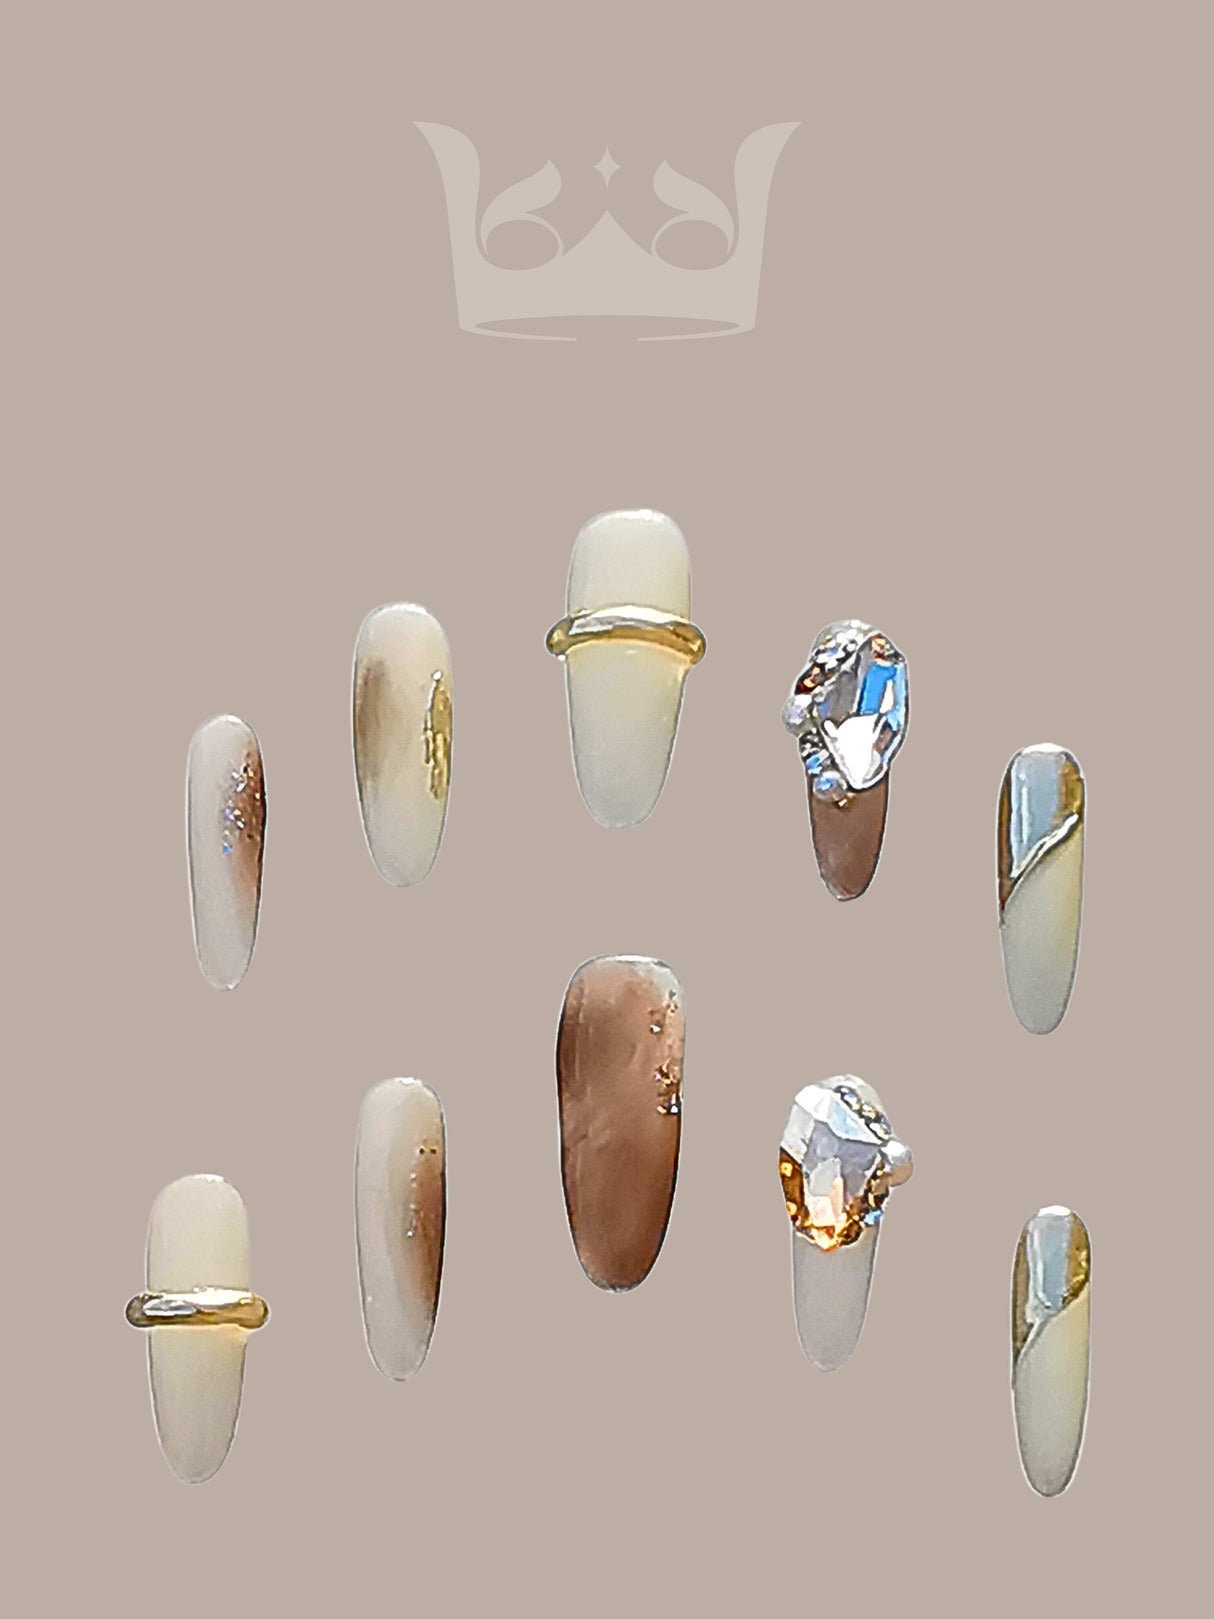 These press-on nails are perfect for special occasions with their elegant design, metallic details, gem-like stones, and long, tapered point shape. Ideal for weddings or galas.